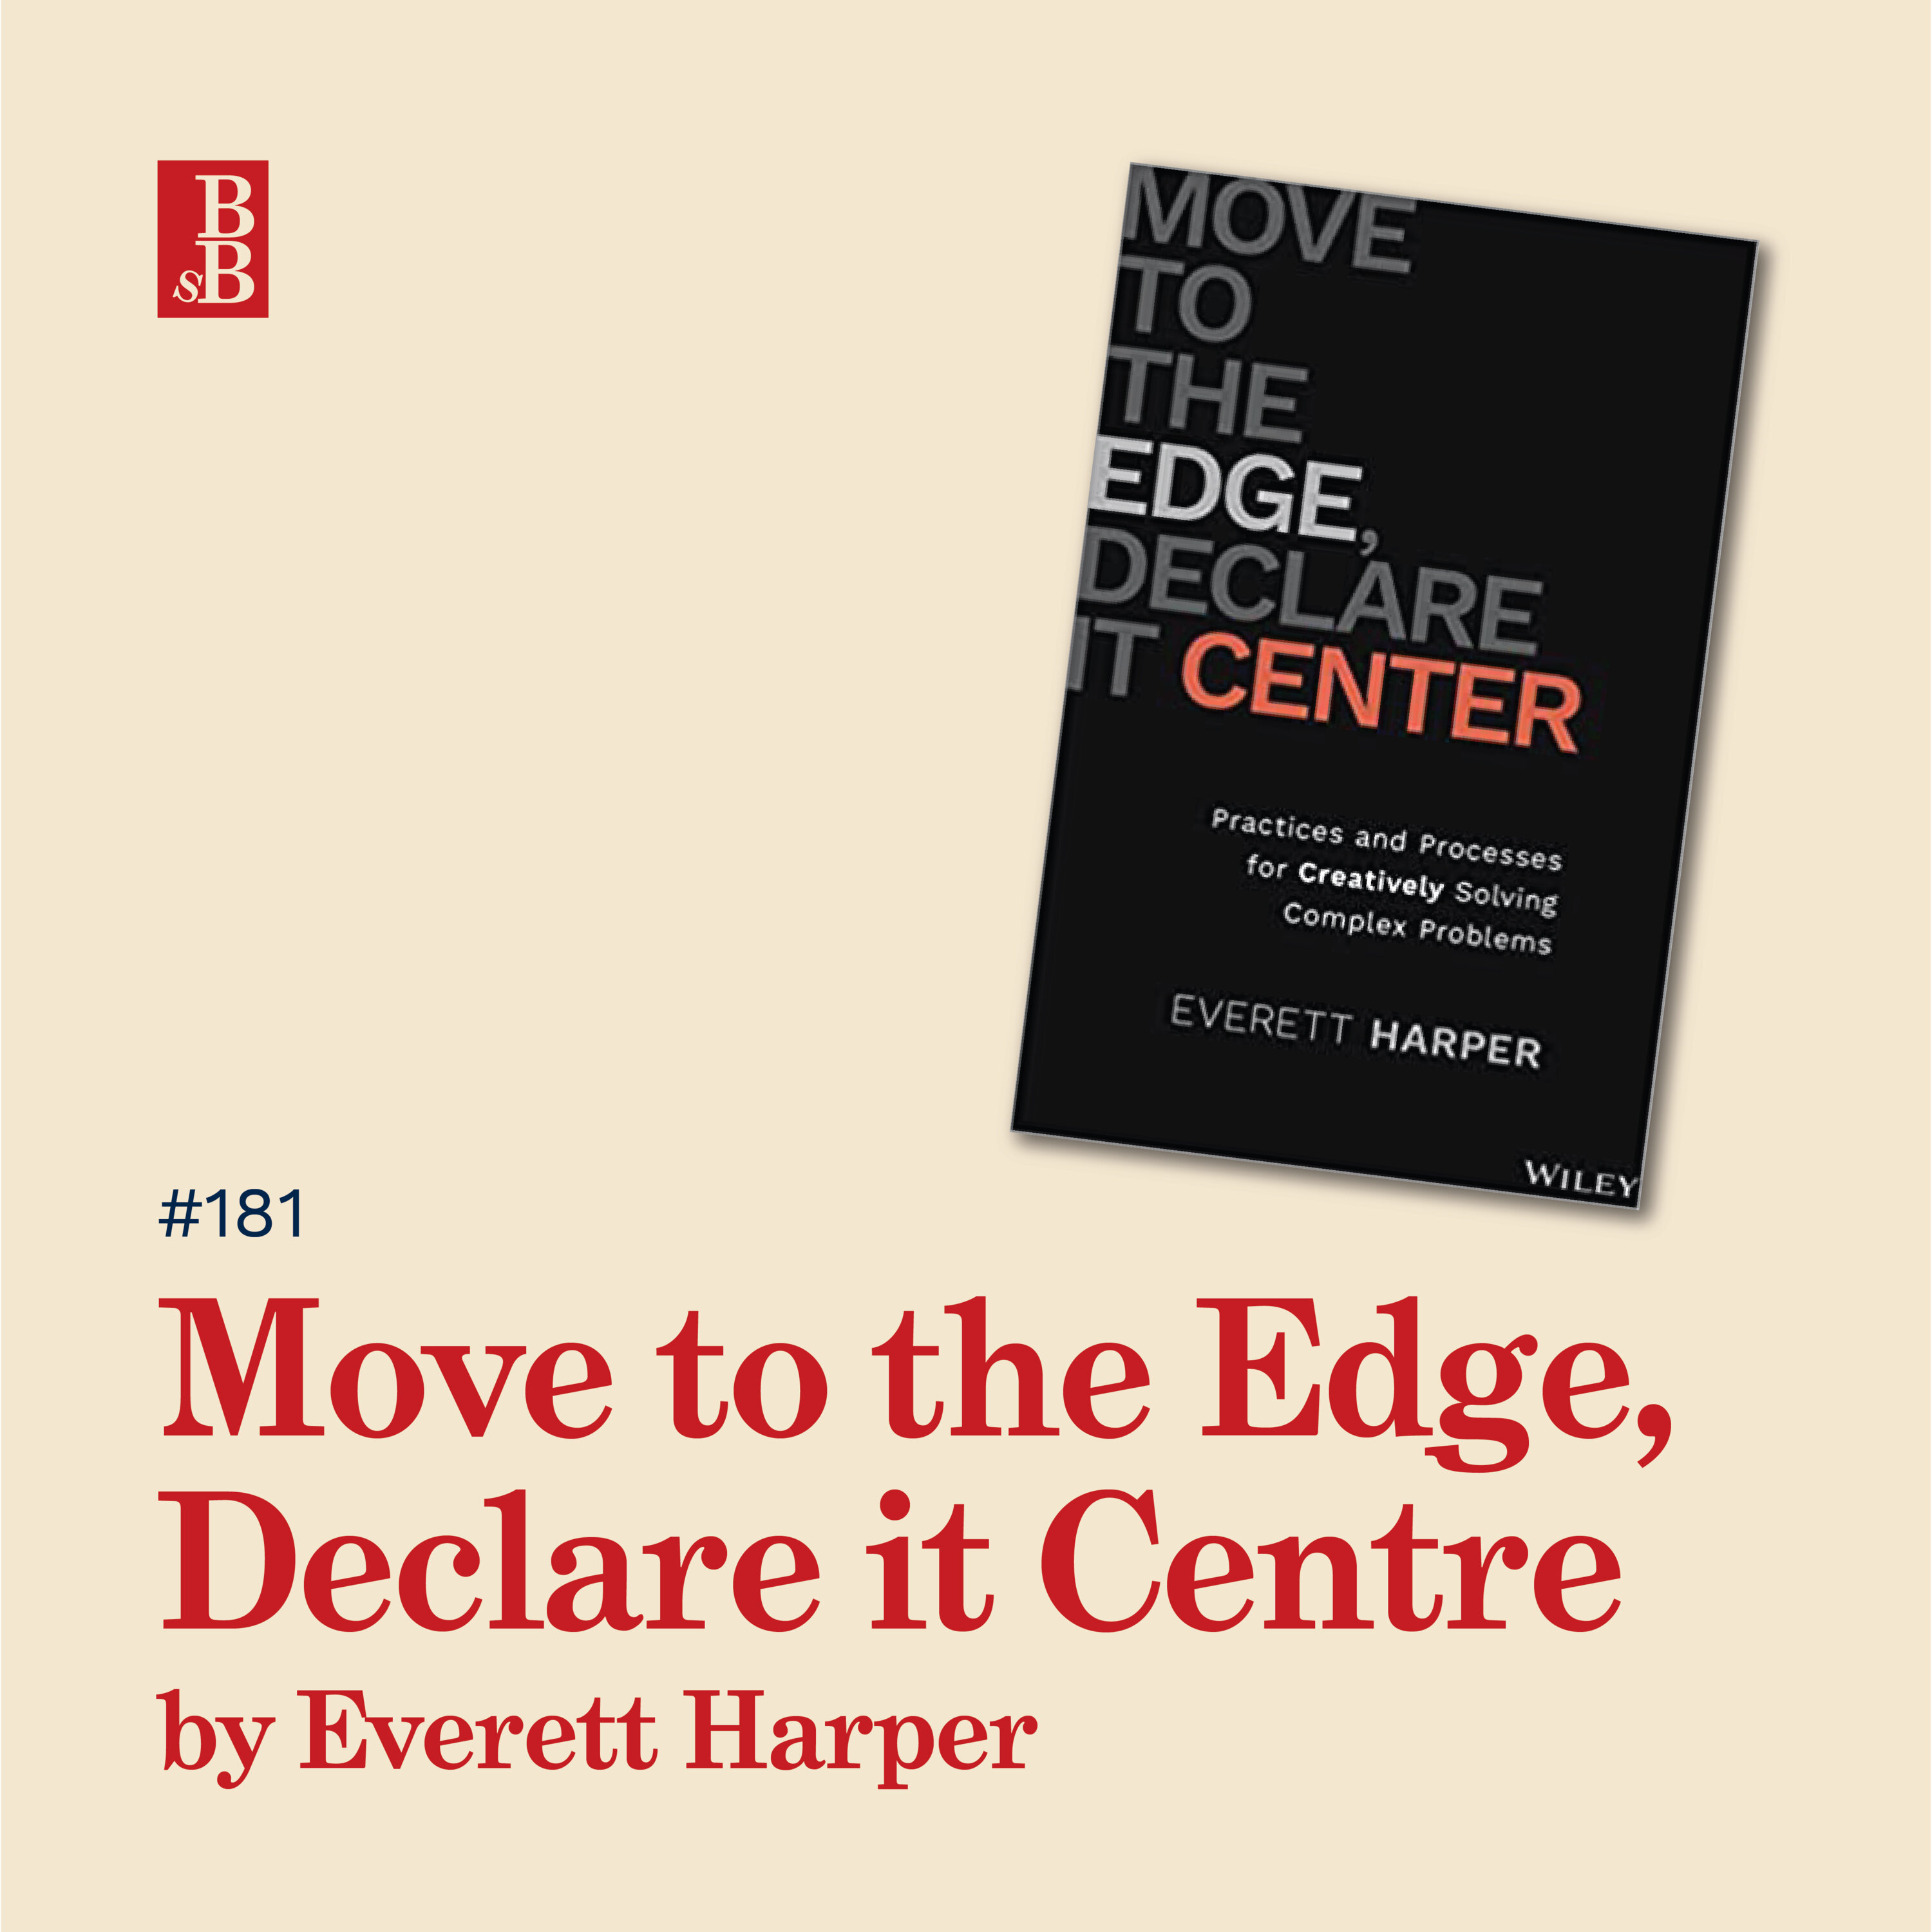 Move to the Edge, Declare it Centre by Everett Harper: how to be more human in complexity Image